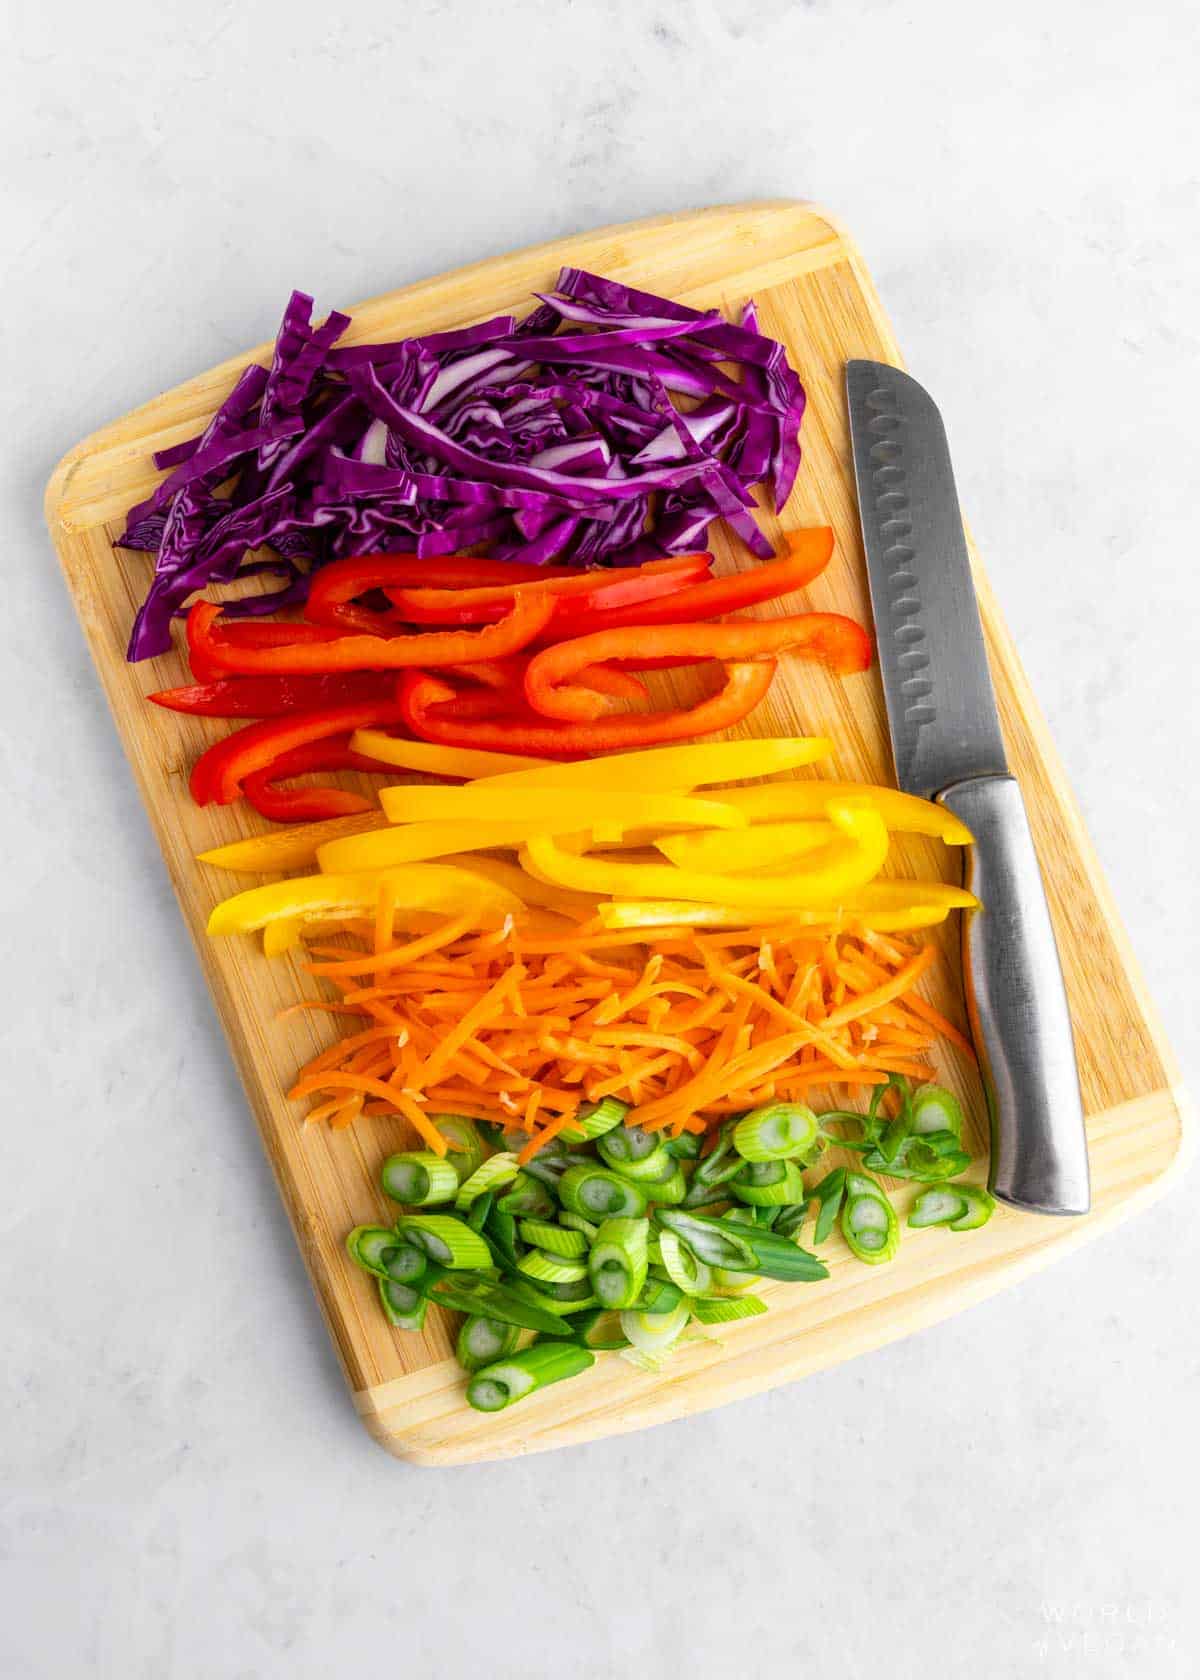 Chopped rainbow vegetables with red, orange, yellow, green, purple.